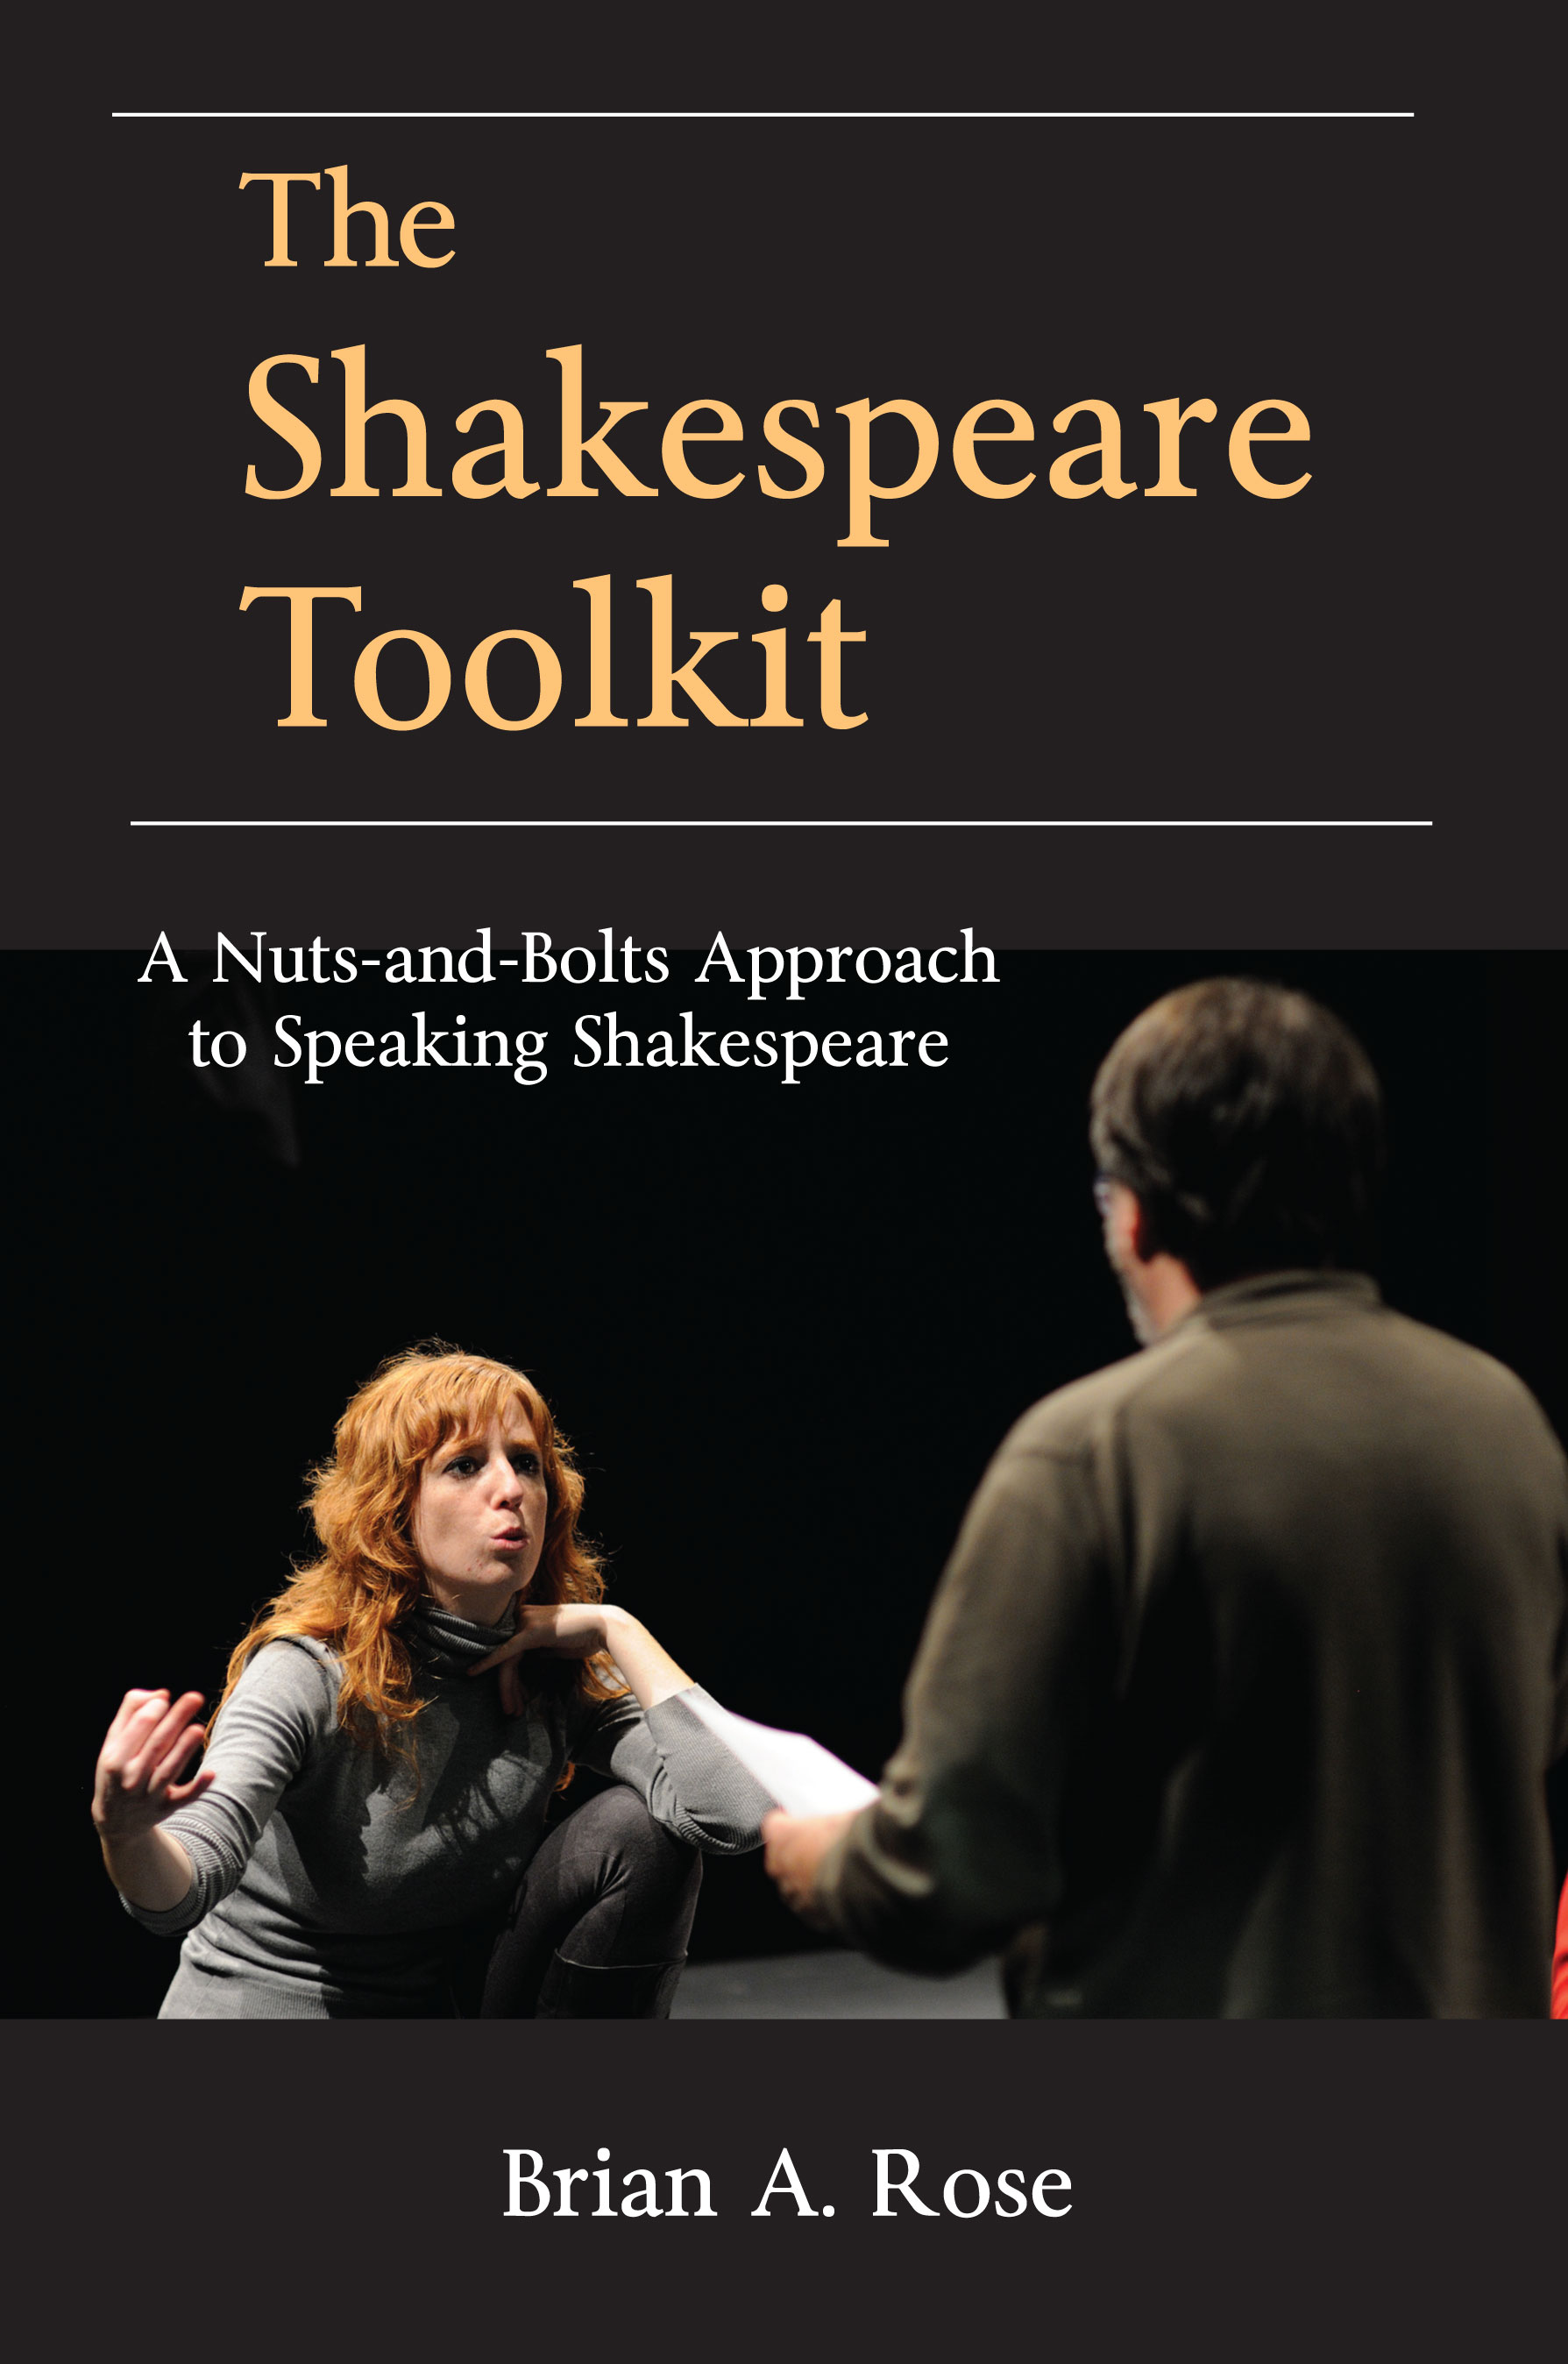 The Shakespeare Toolkit: A Nuts-and-Bolts Approach to Speaking Shakespeare by Brian A. Rose